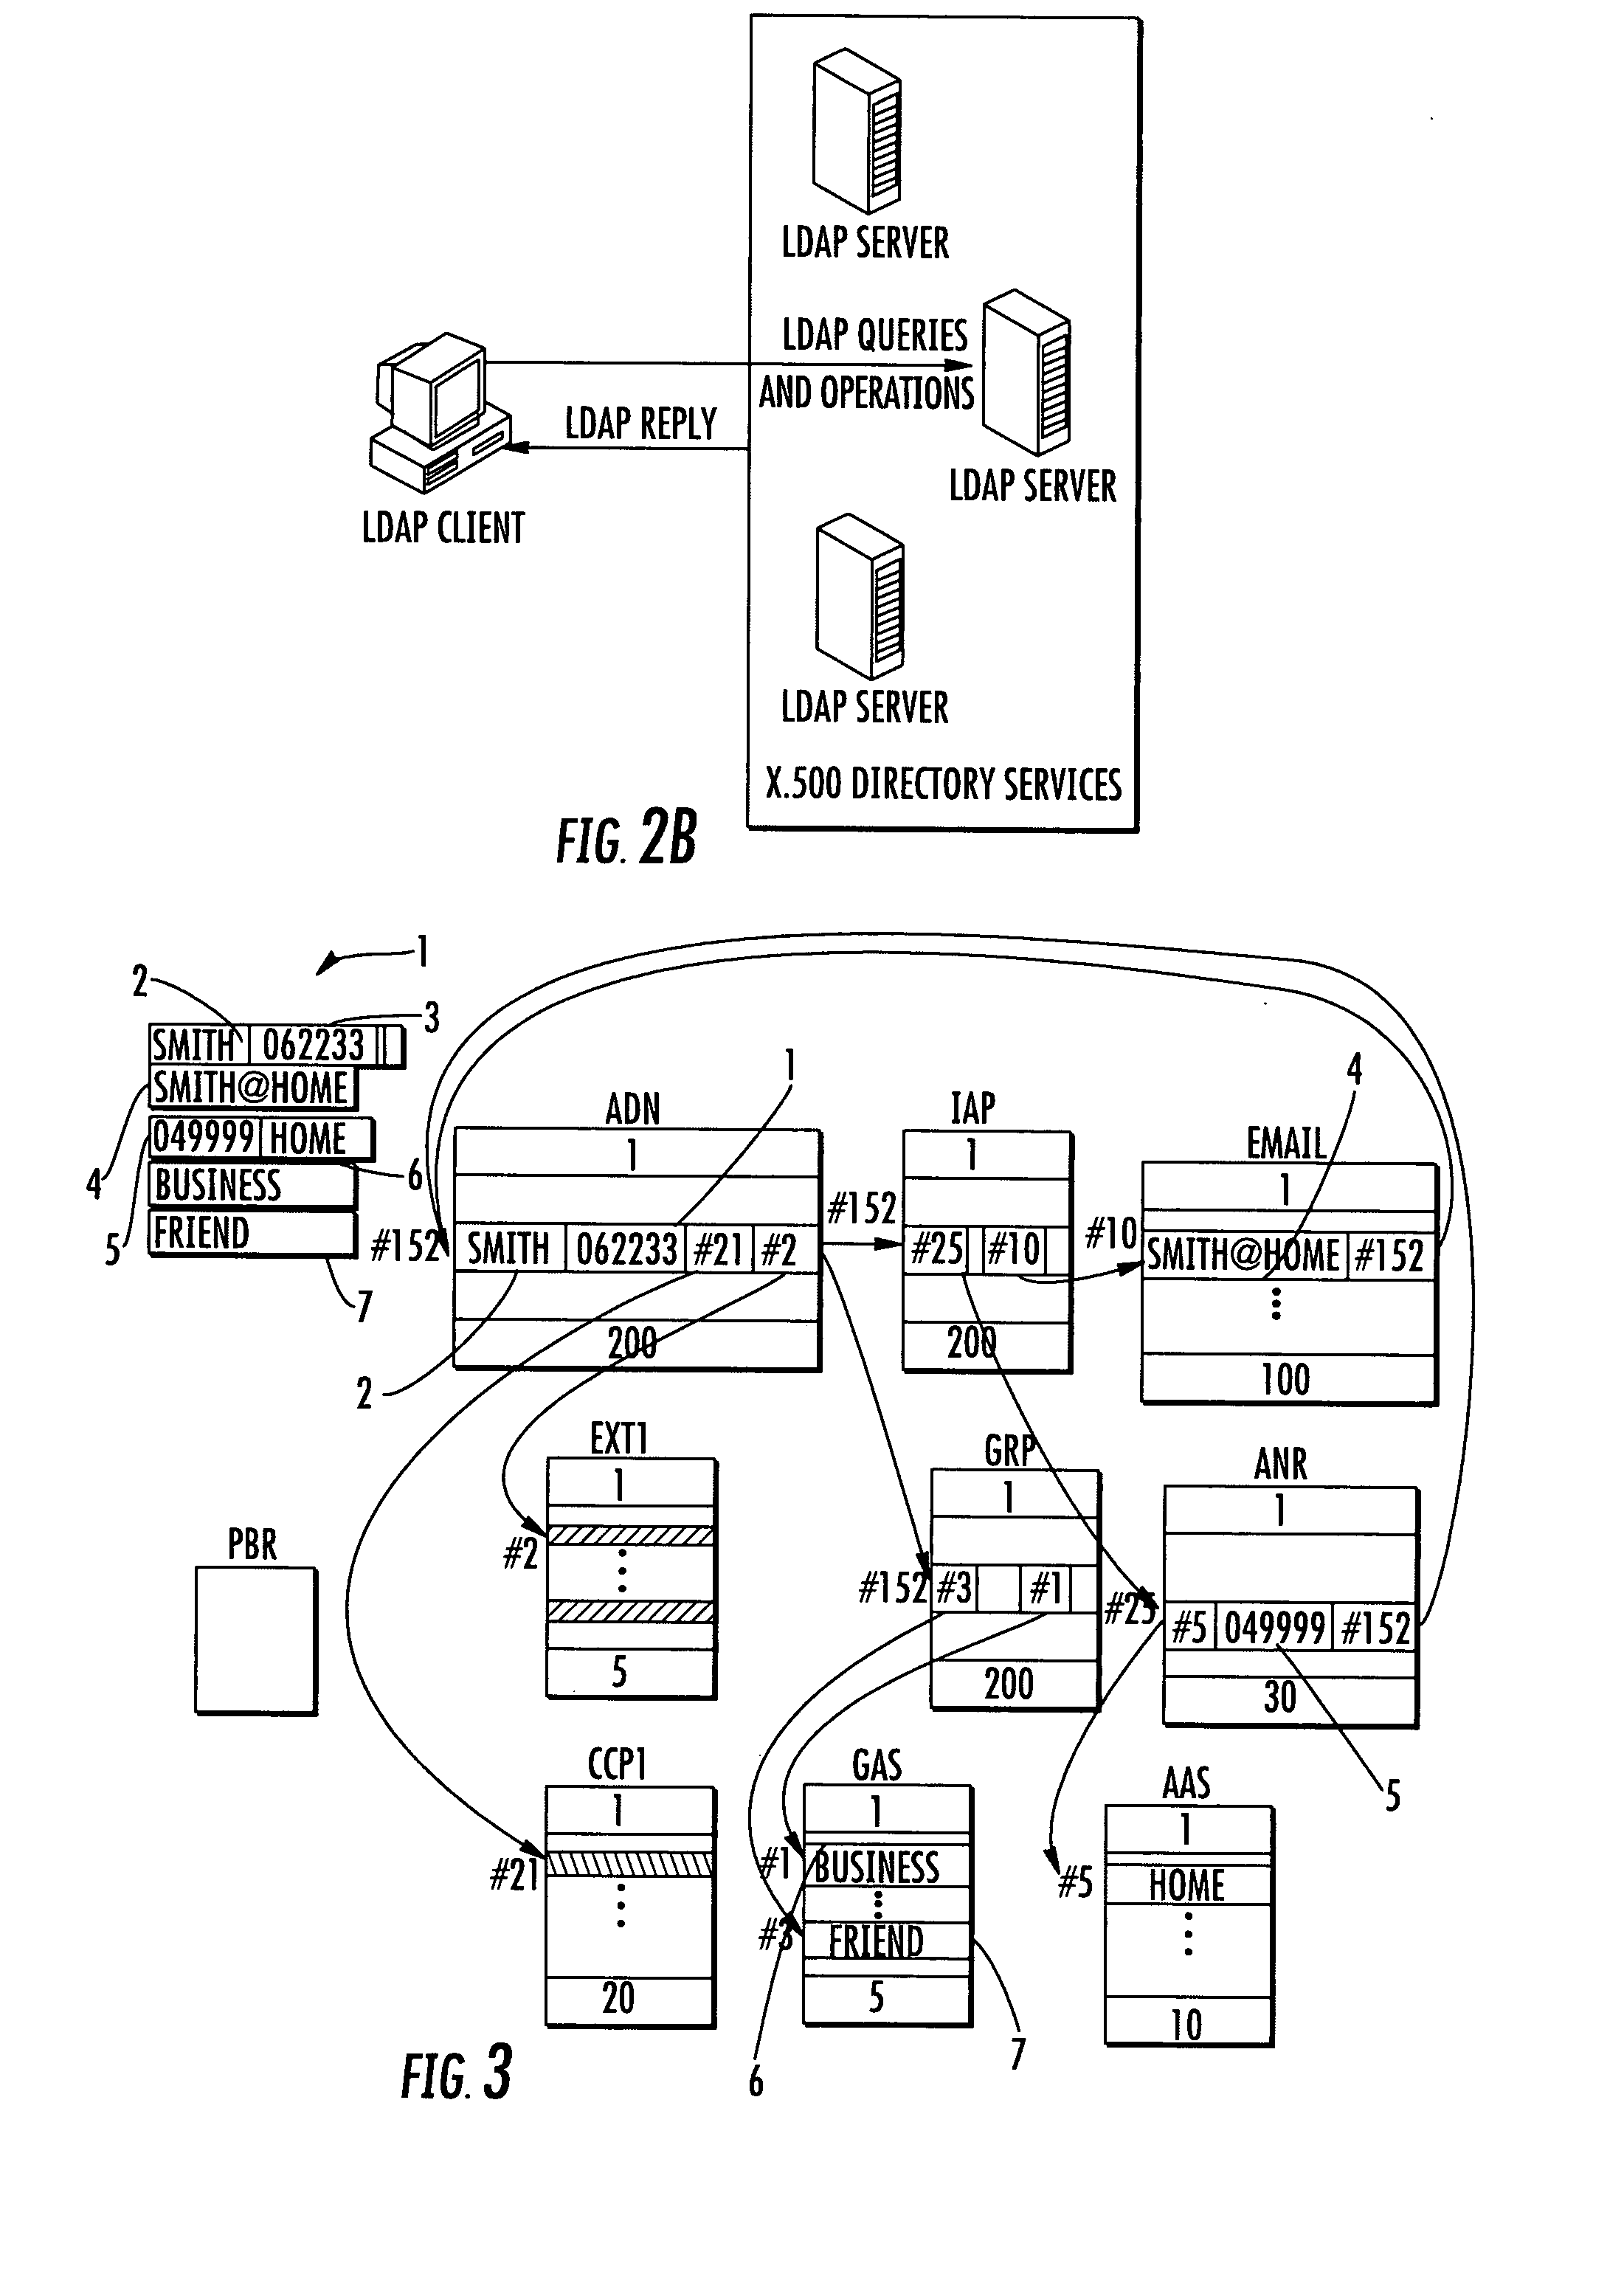 Method for accessing structured data in IC cards